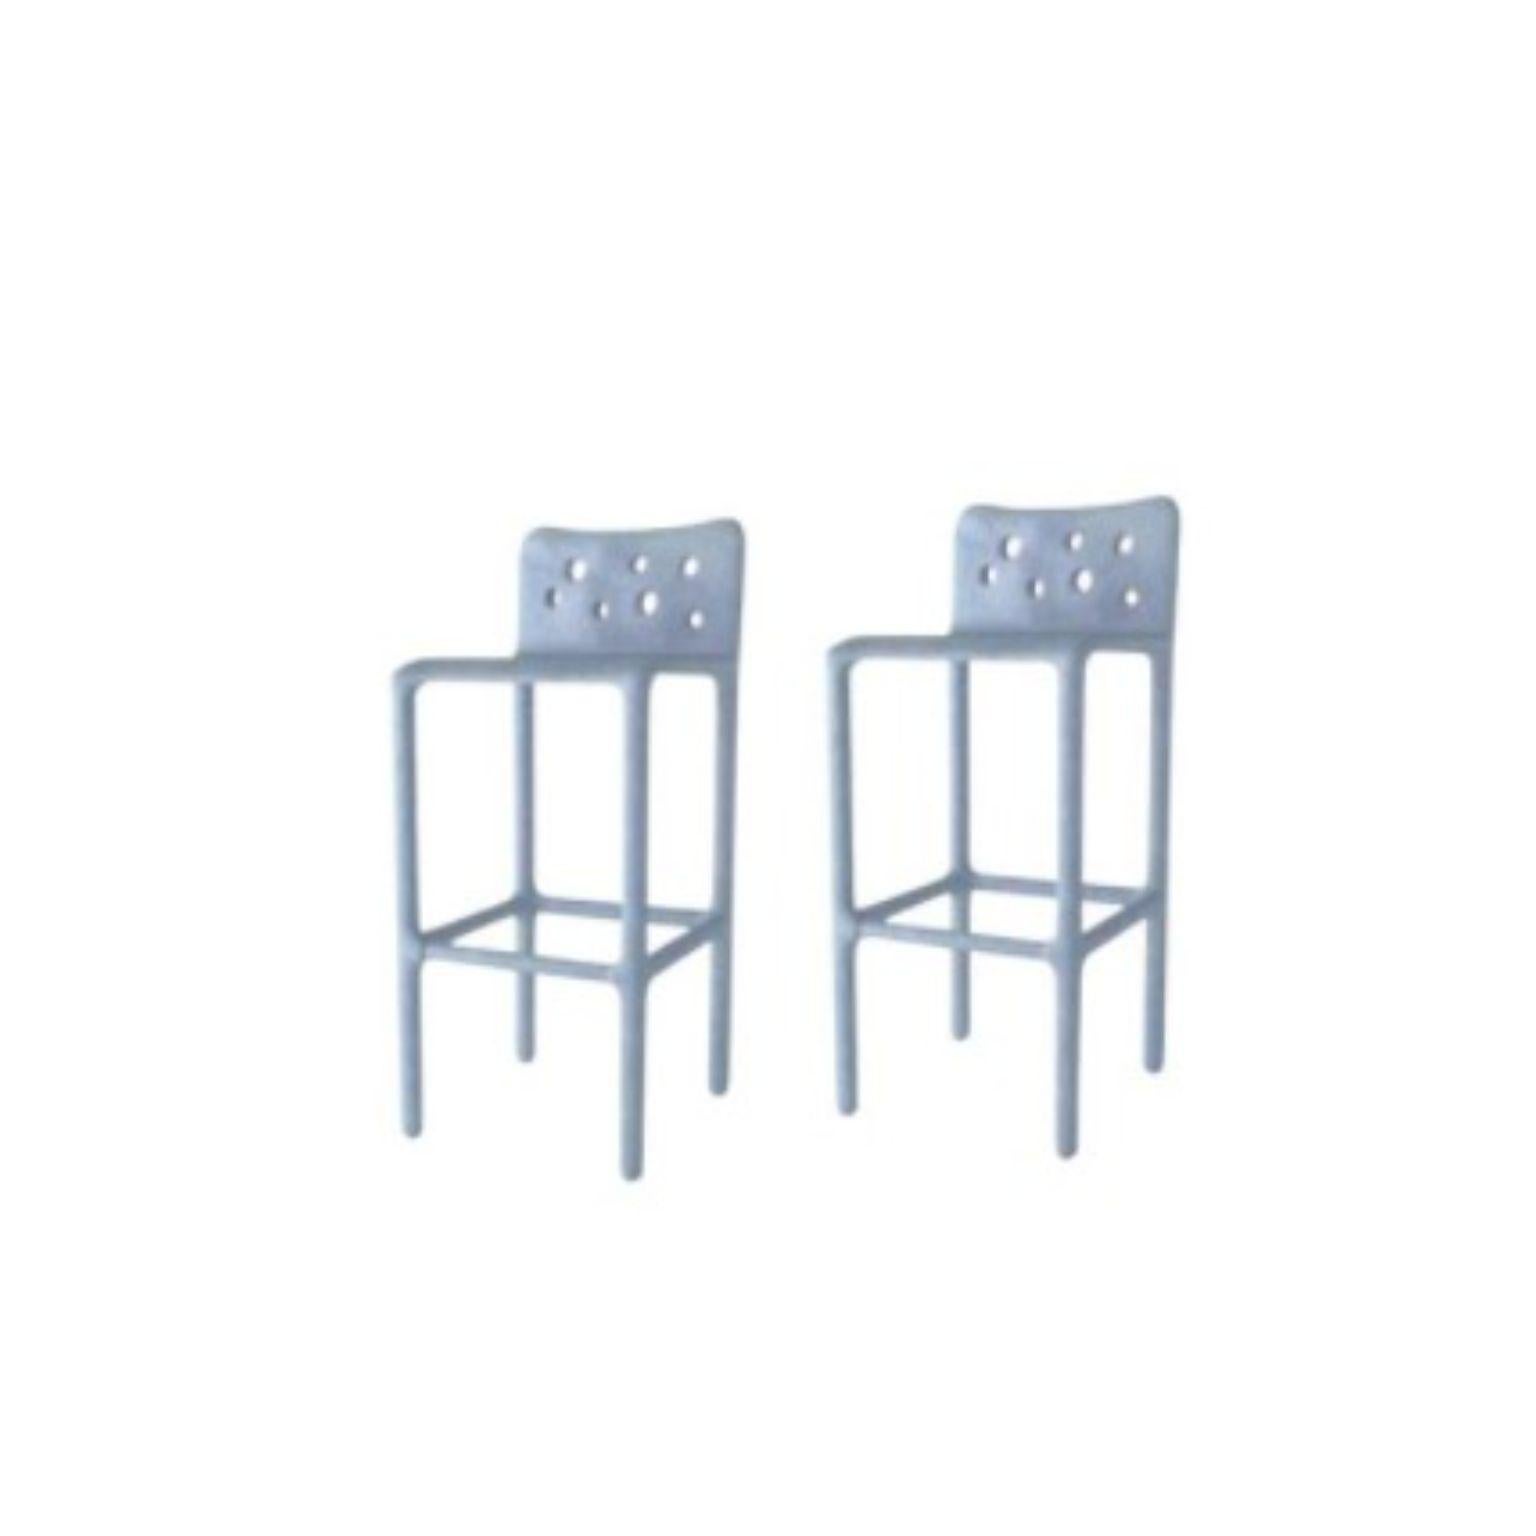 Set of 2 sky blue sculpted Contemporary Chairs by Faina
Design: Victoriya Yakusha
Material: steel, flax rubber, biopolymer, cellulose
Dimensions: height 106 x width 45 x sitting place width 49 legs height: 80 cm
Weight: 20 kilos.

(Also